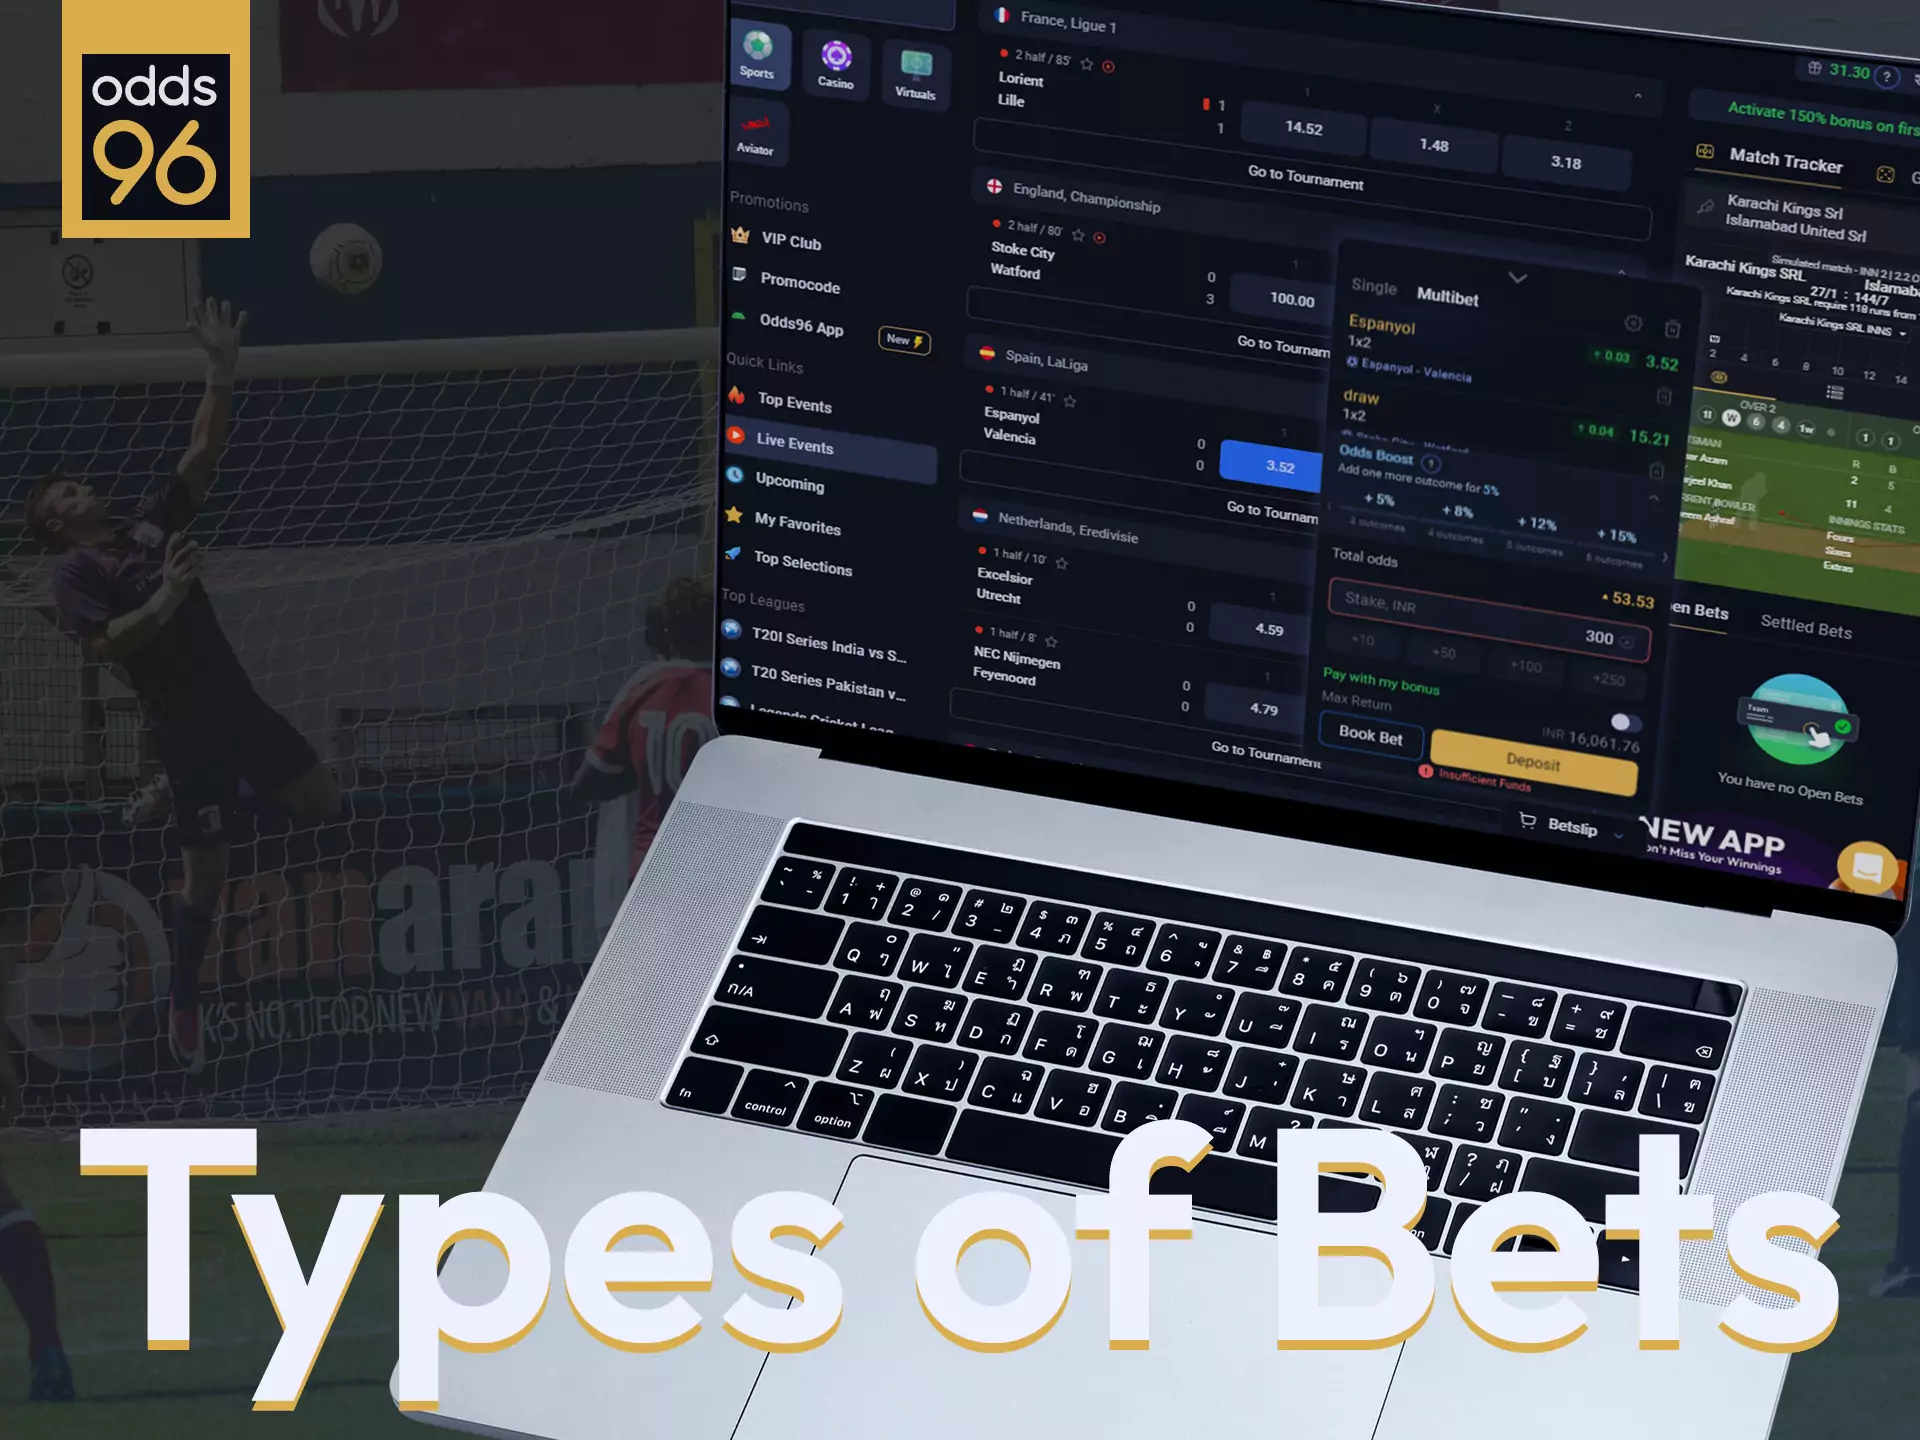 Try different types of bets in Odds96.